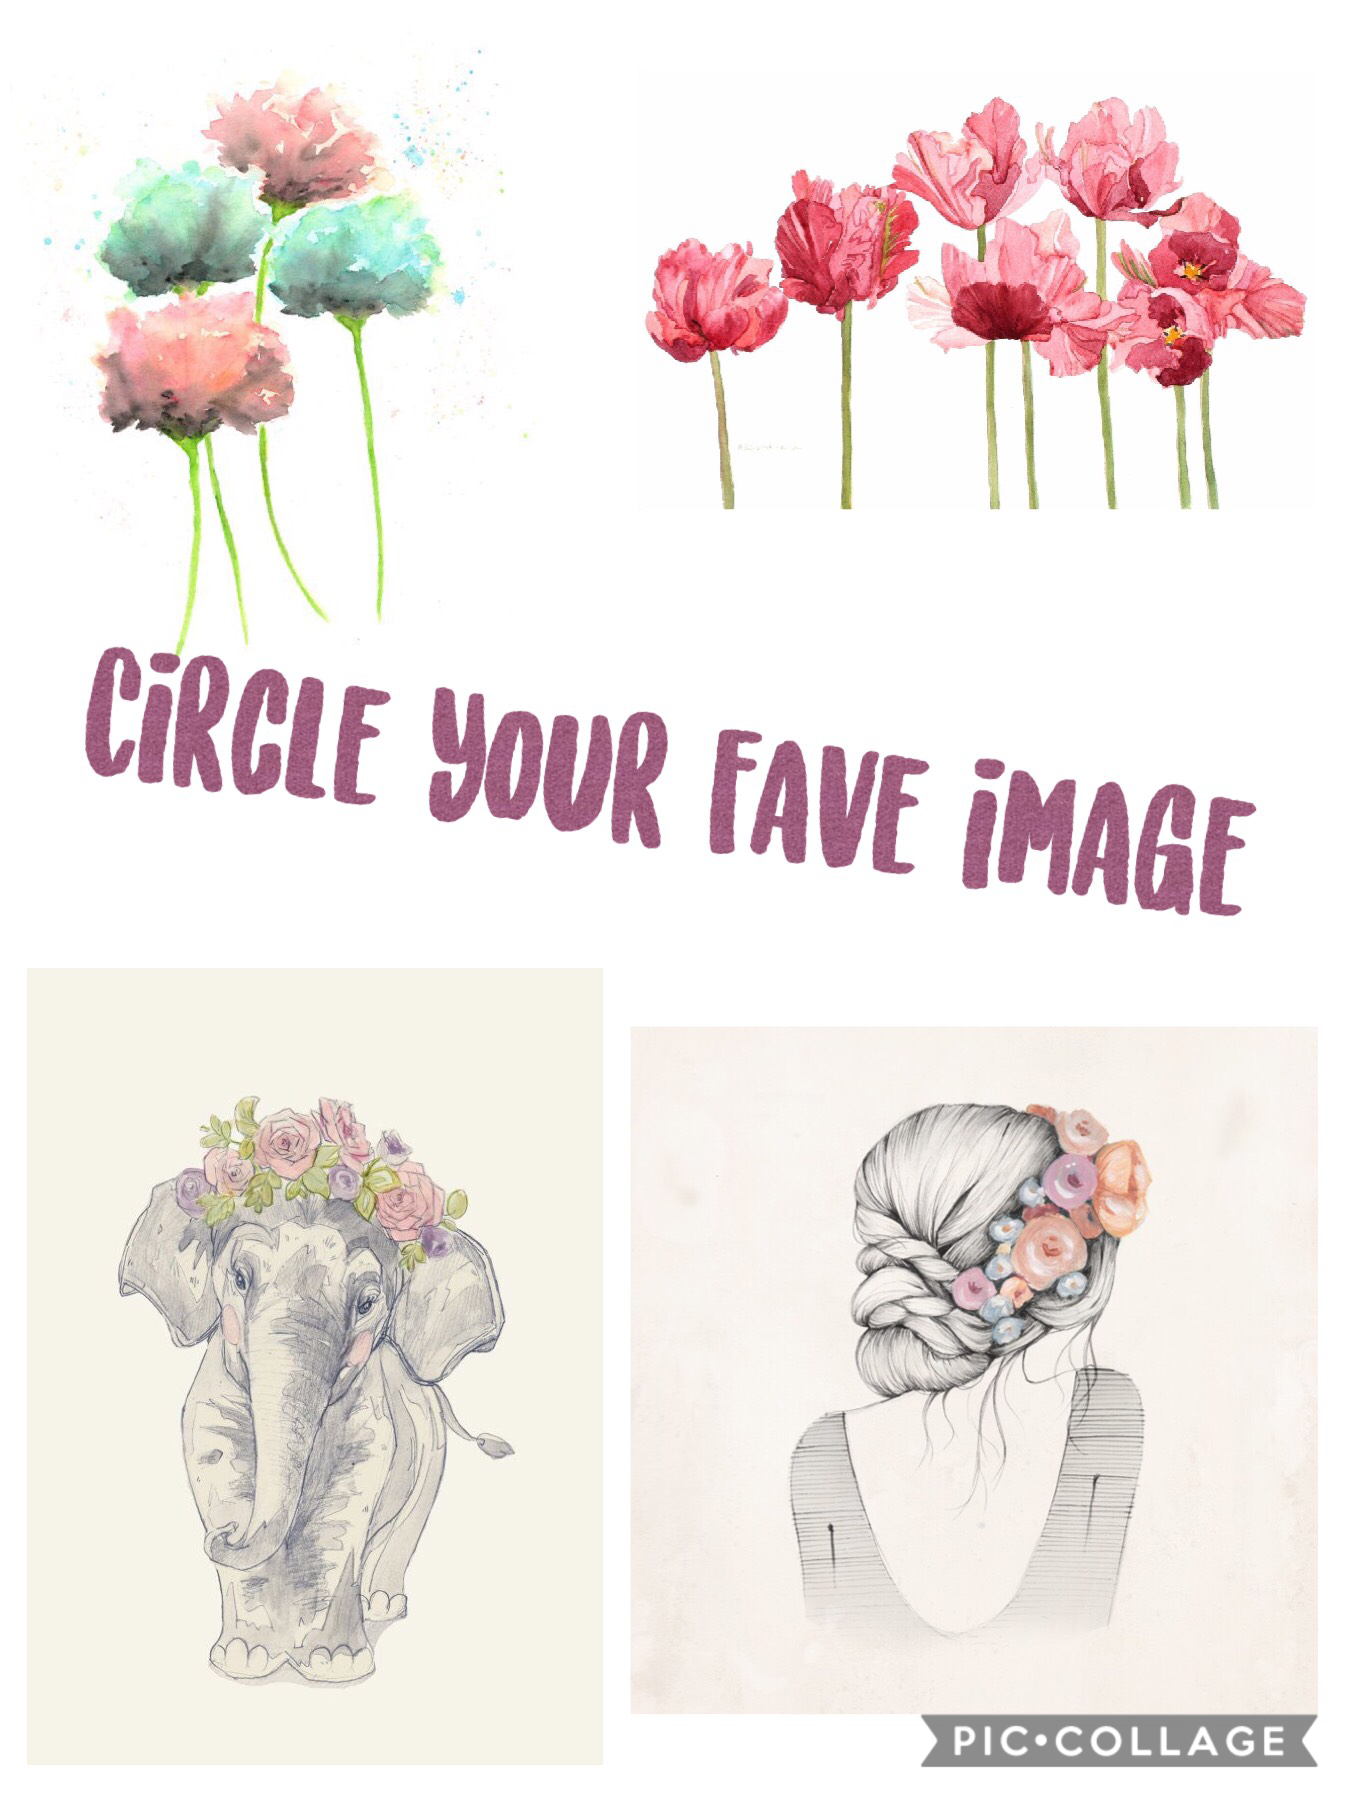 Circle your favourite floral image. Please follow em and tell others about my page. Thx and bye